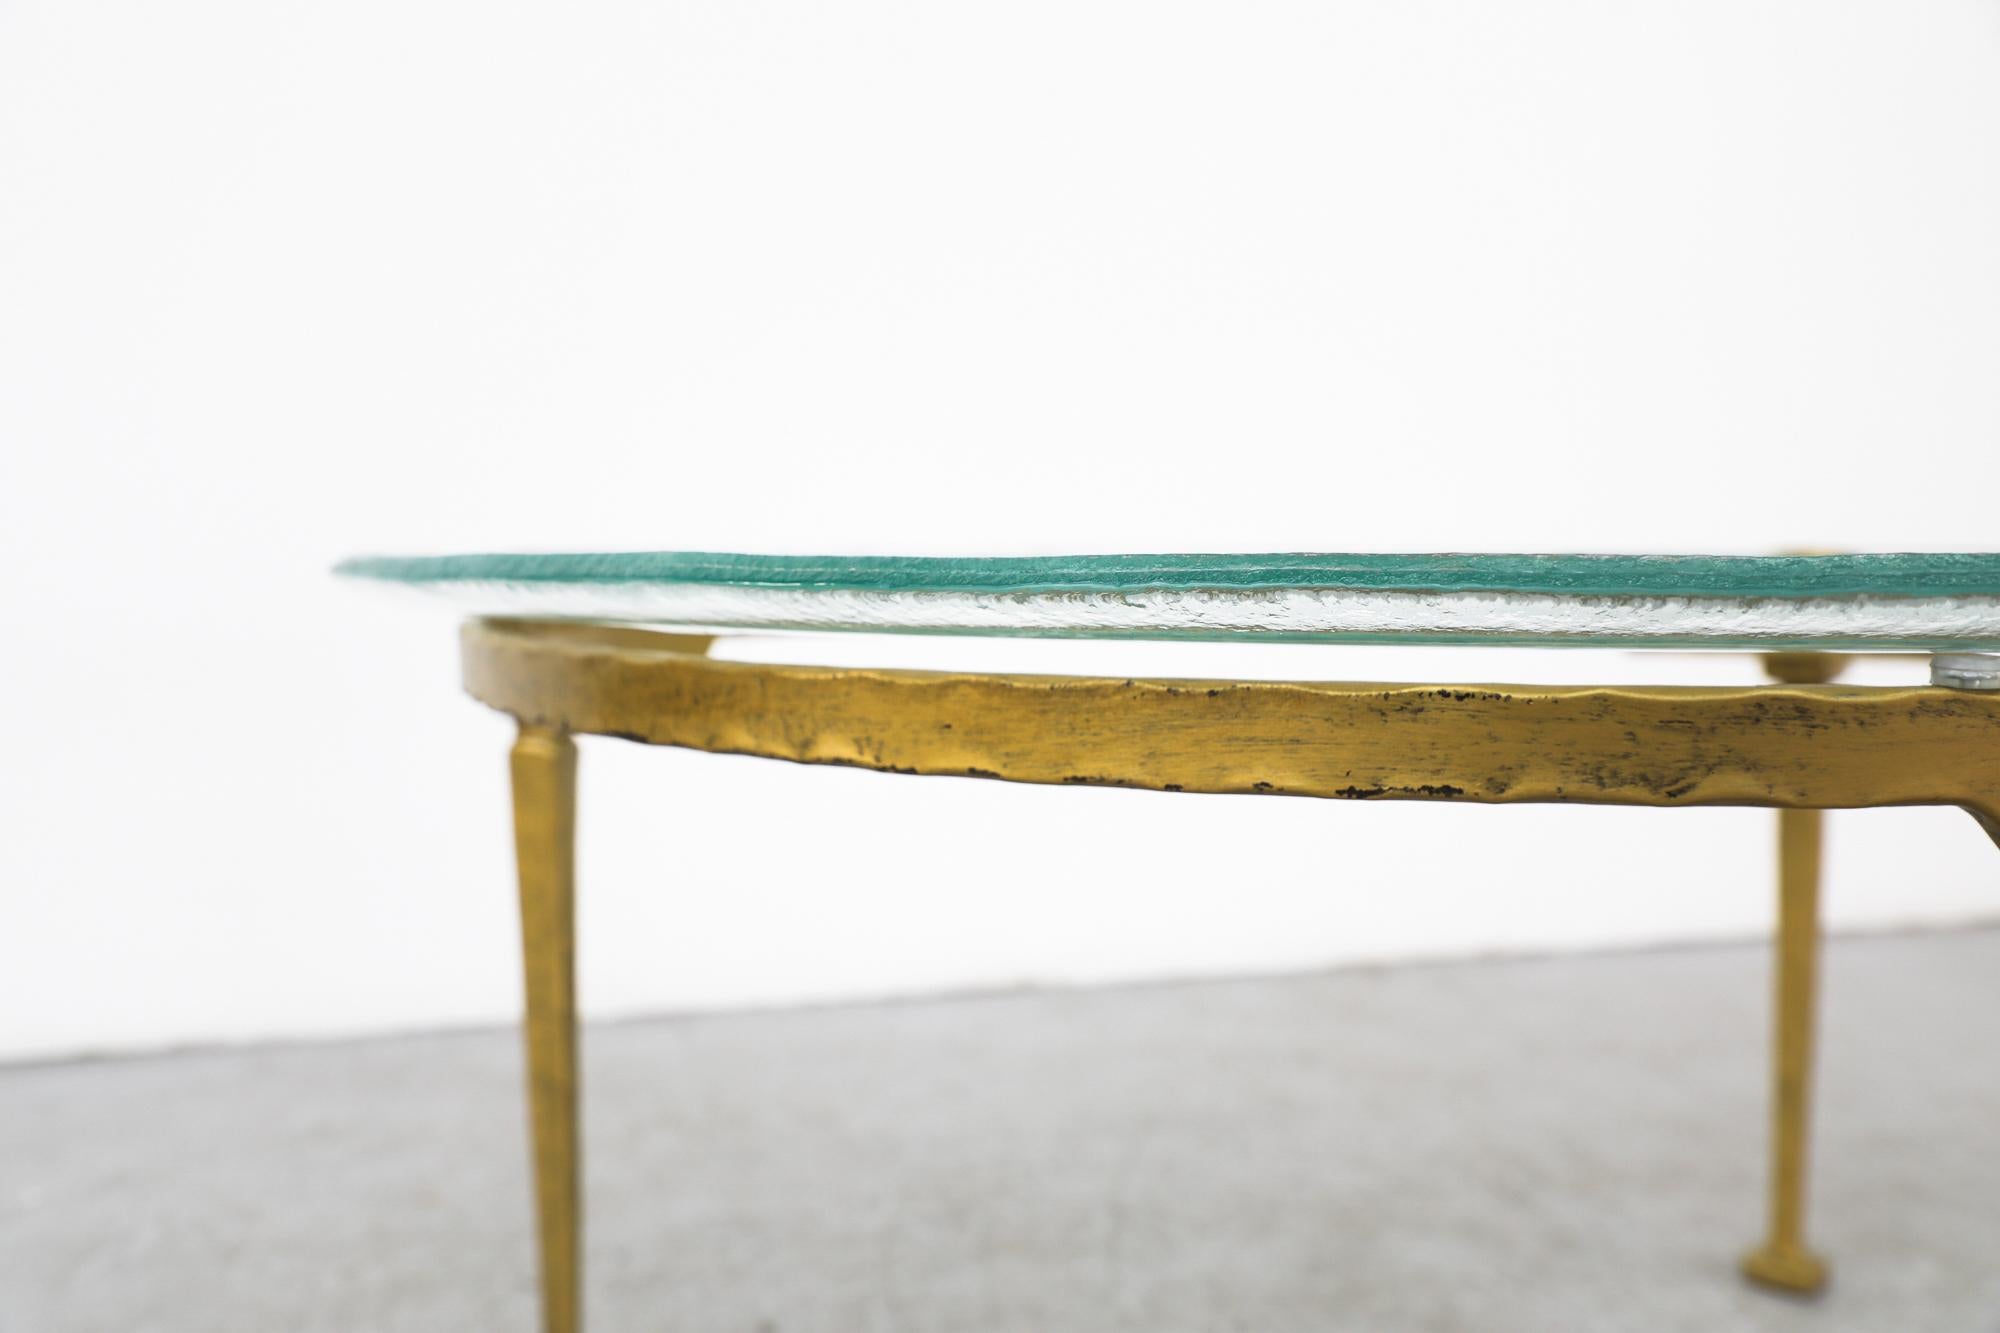 Gold Enameled Lothar Klute Brutalist Coffee Table with Molded Glass Top For Sale 6